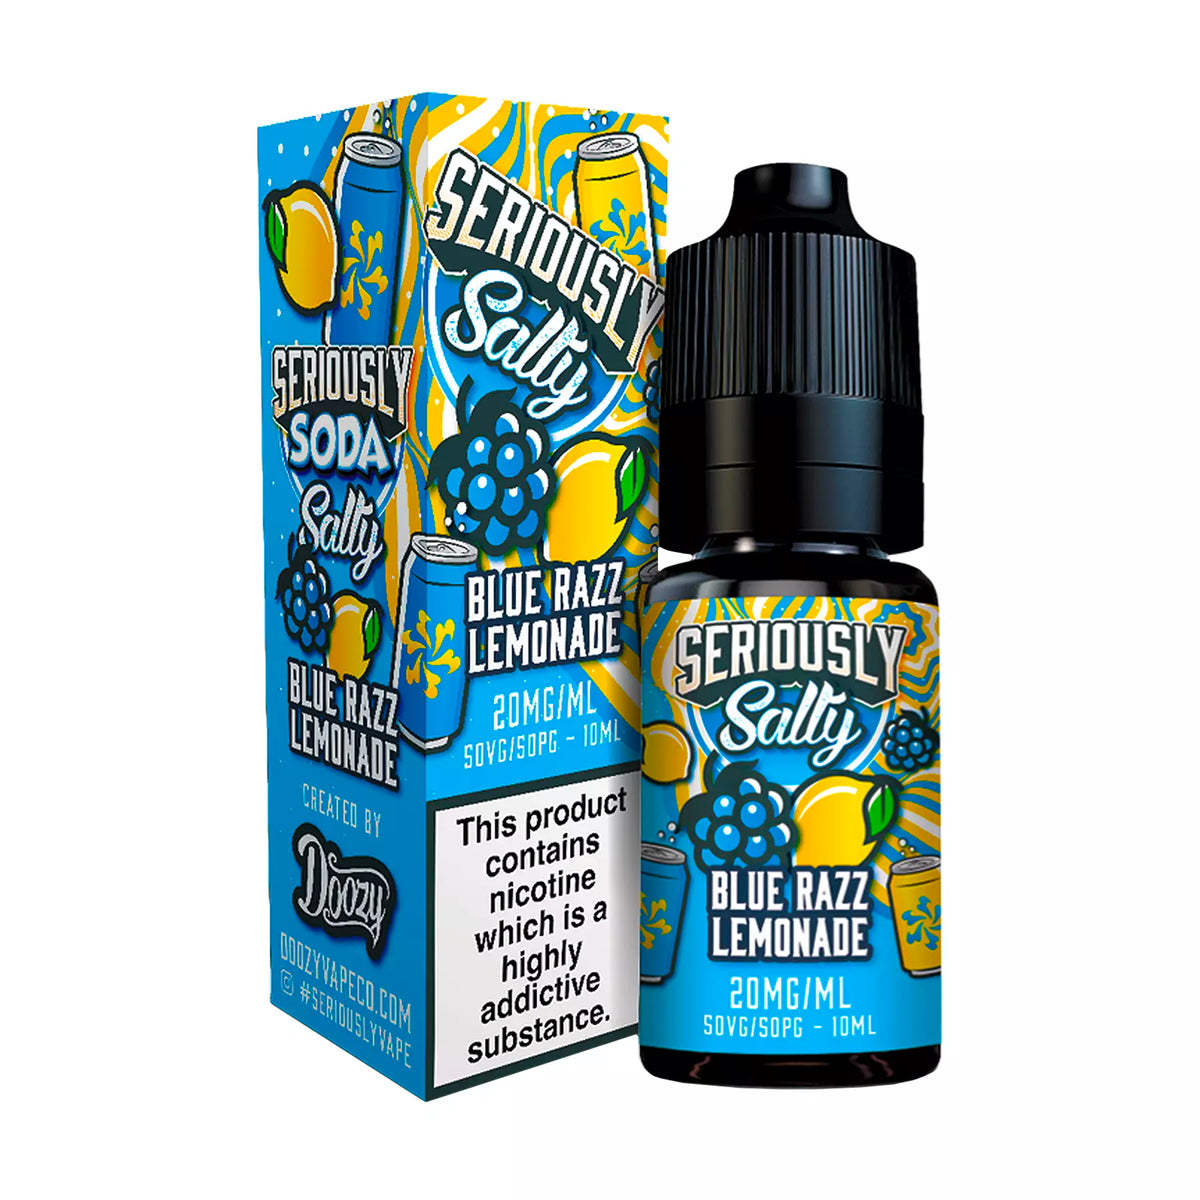 Our Famous Blue Razz Berry now with a Twist of Lemonade. The insanely tasty Blue Raspberries now with a Squeeze of Lemon make this Flavour even more Special!